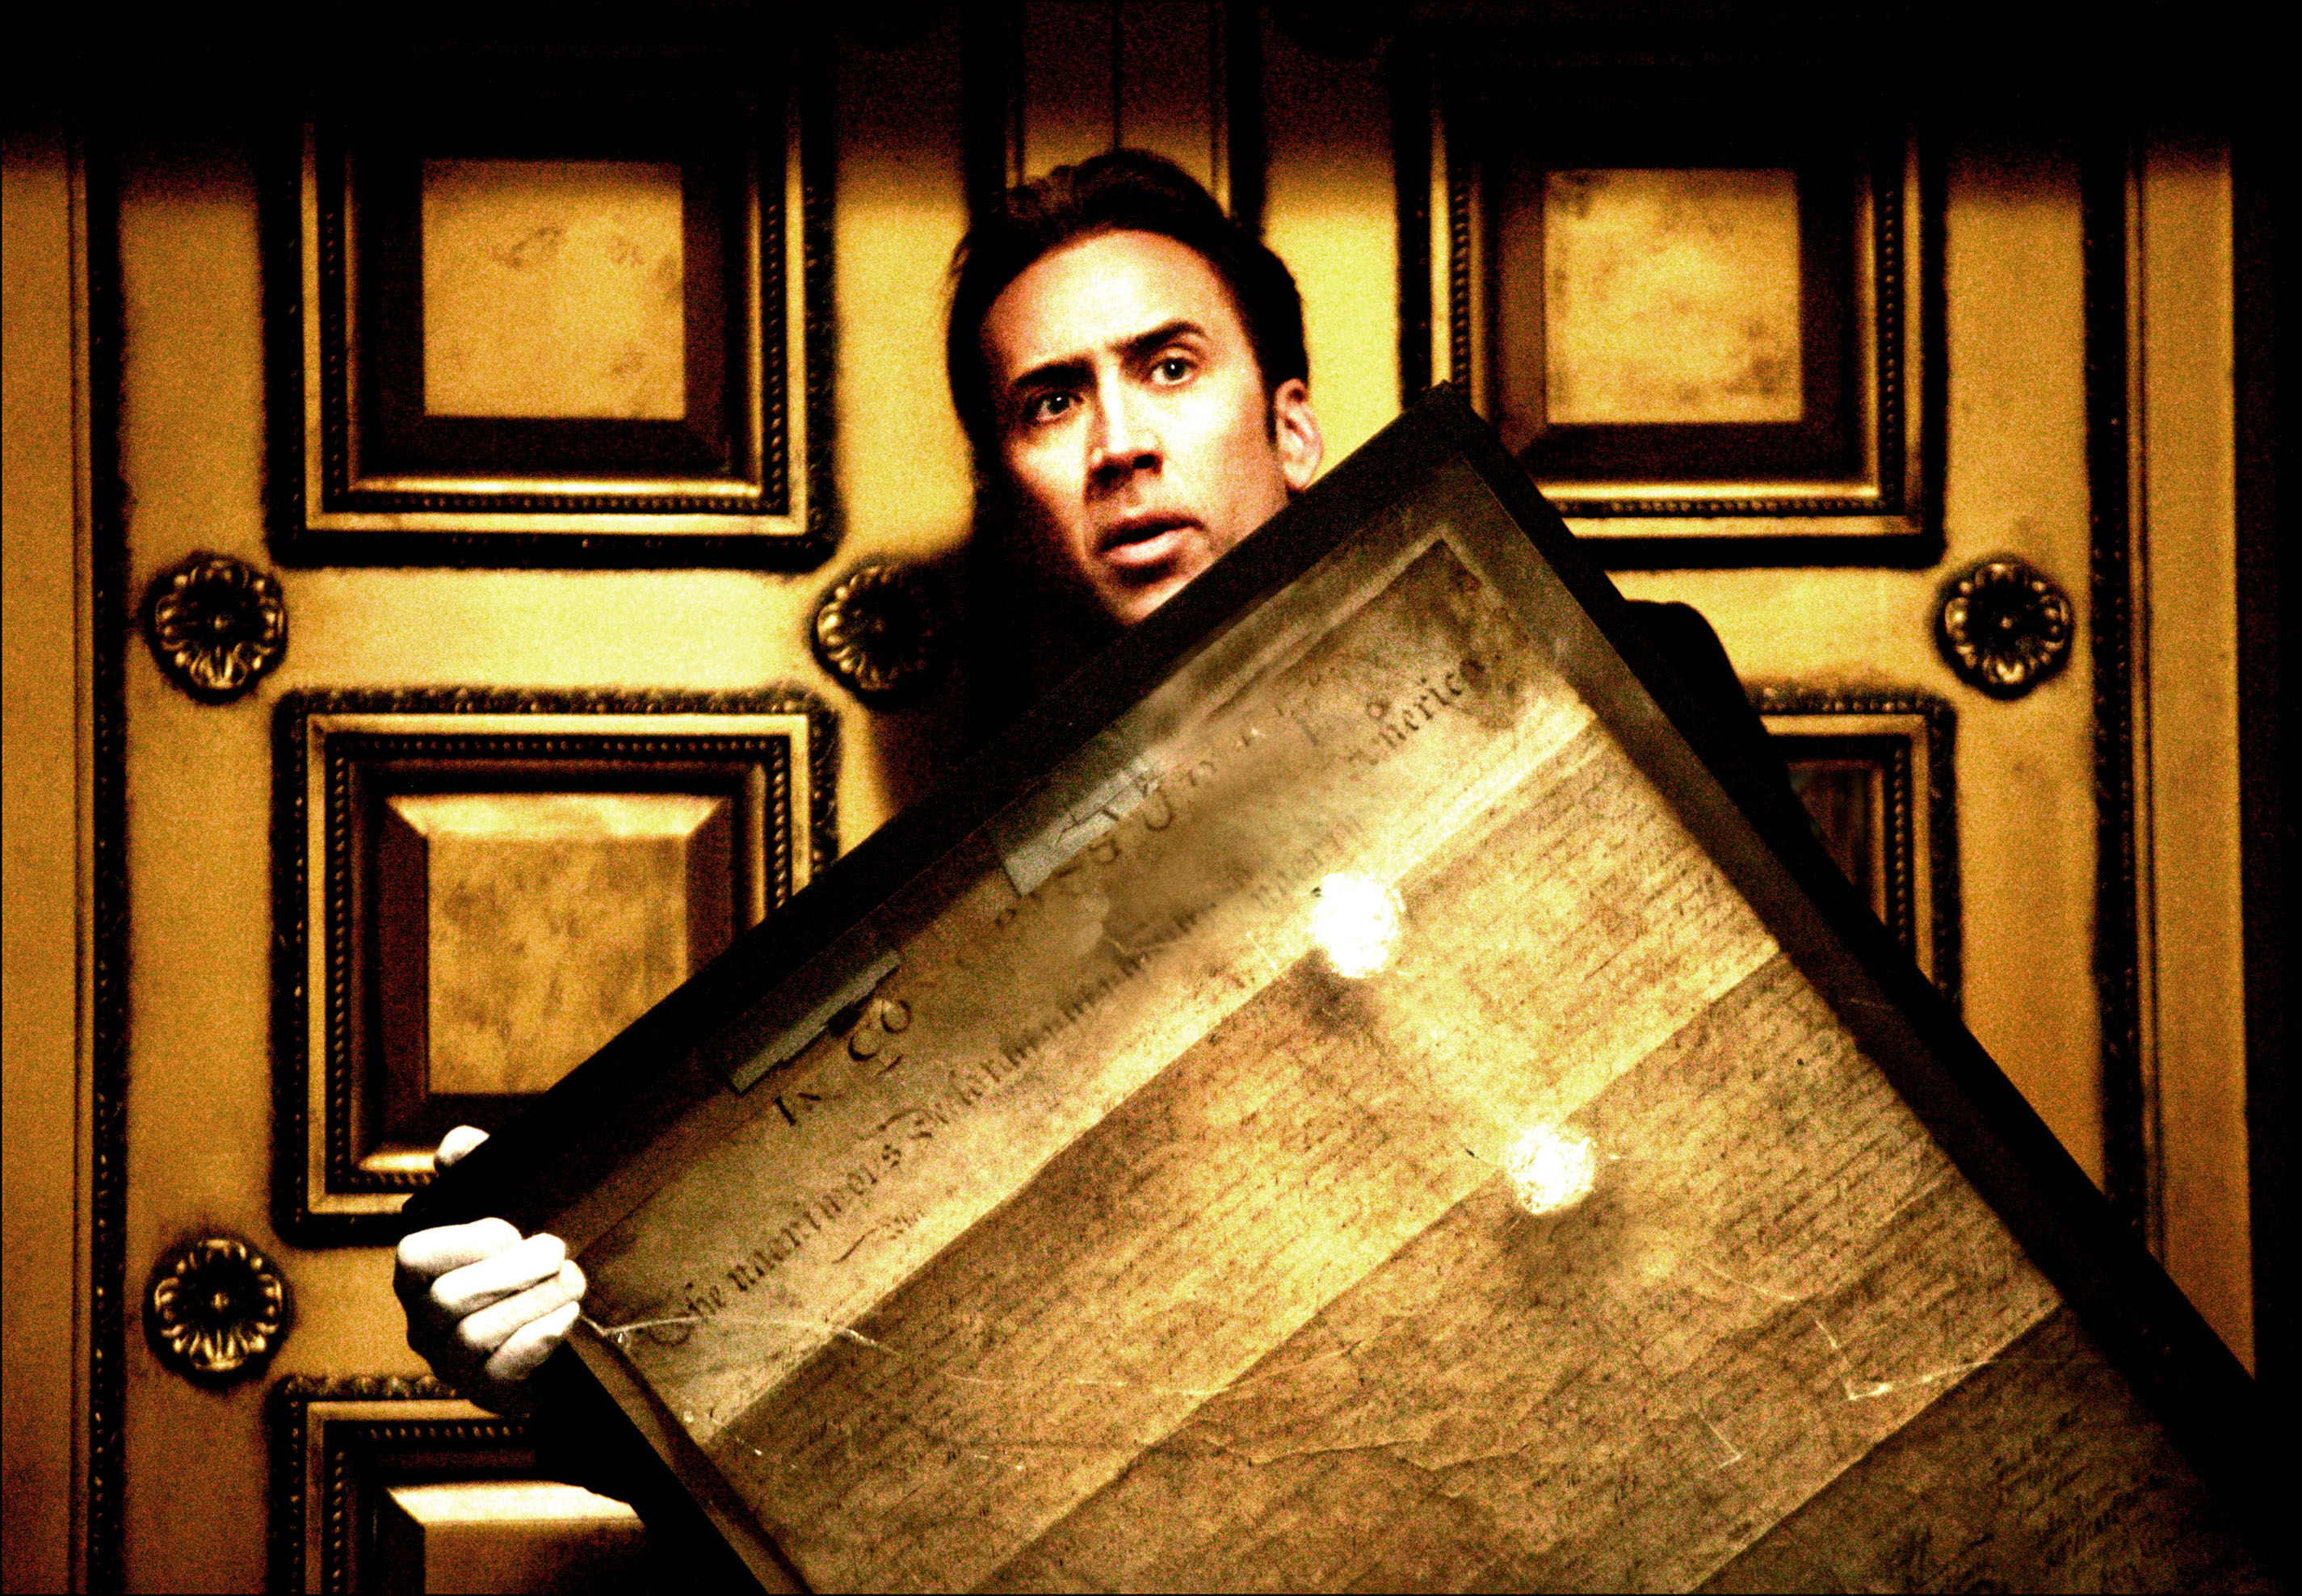 A man steals the declaration of Independence